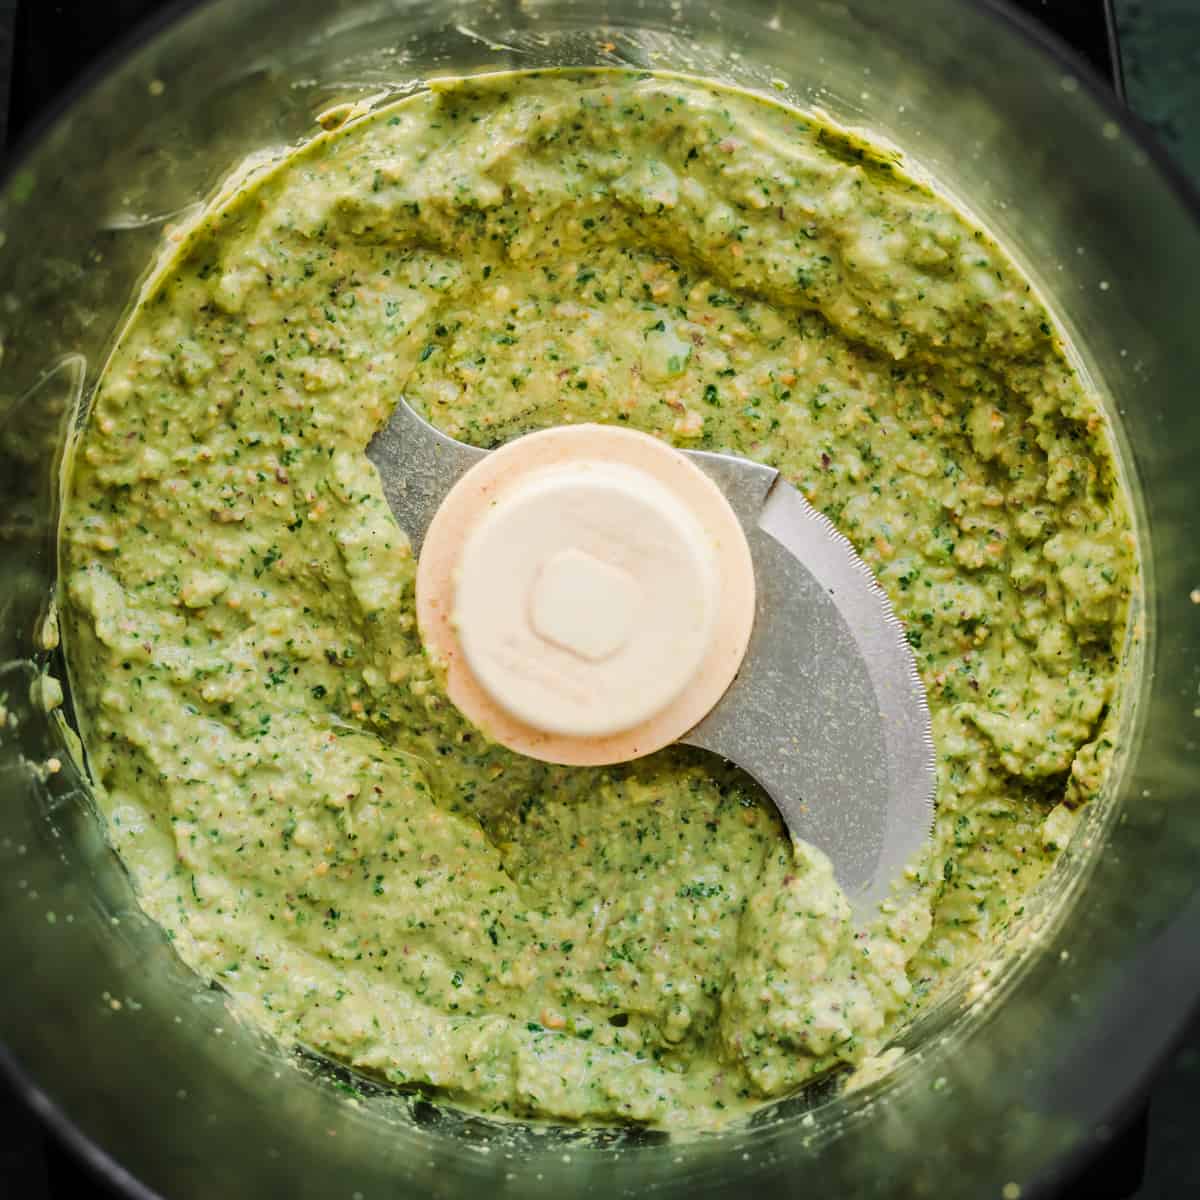 Pistachio pesto ingredients in a blender after being blended.